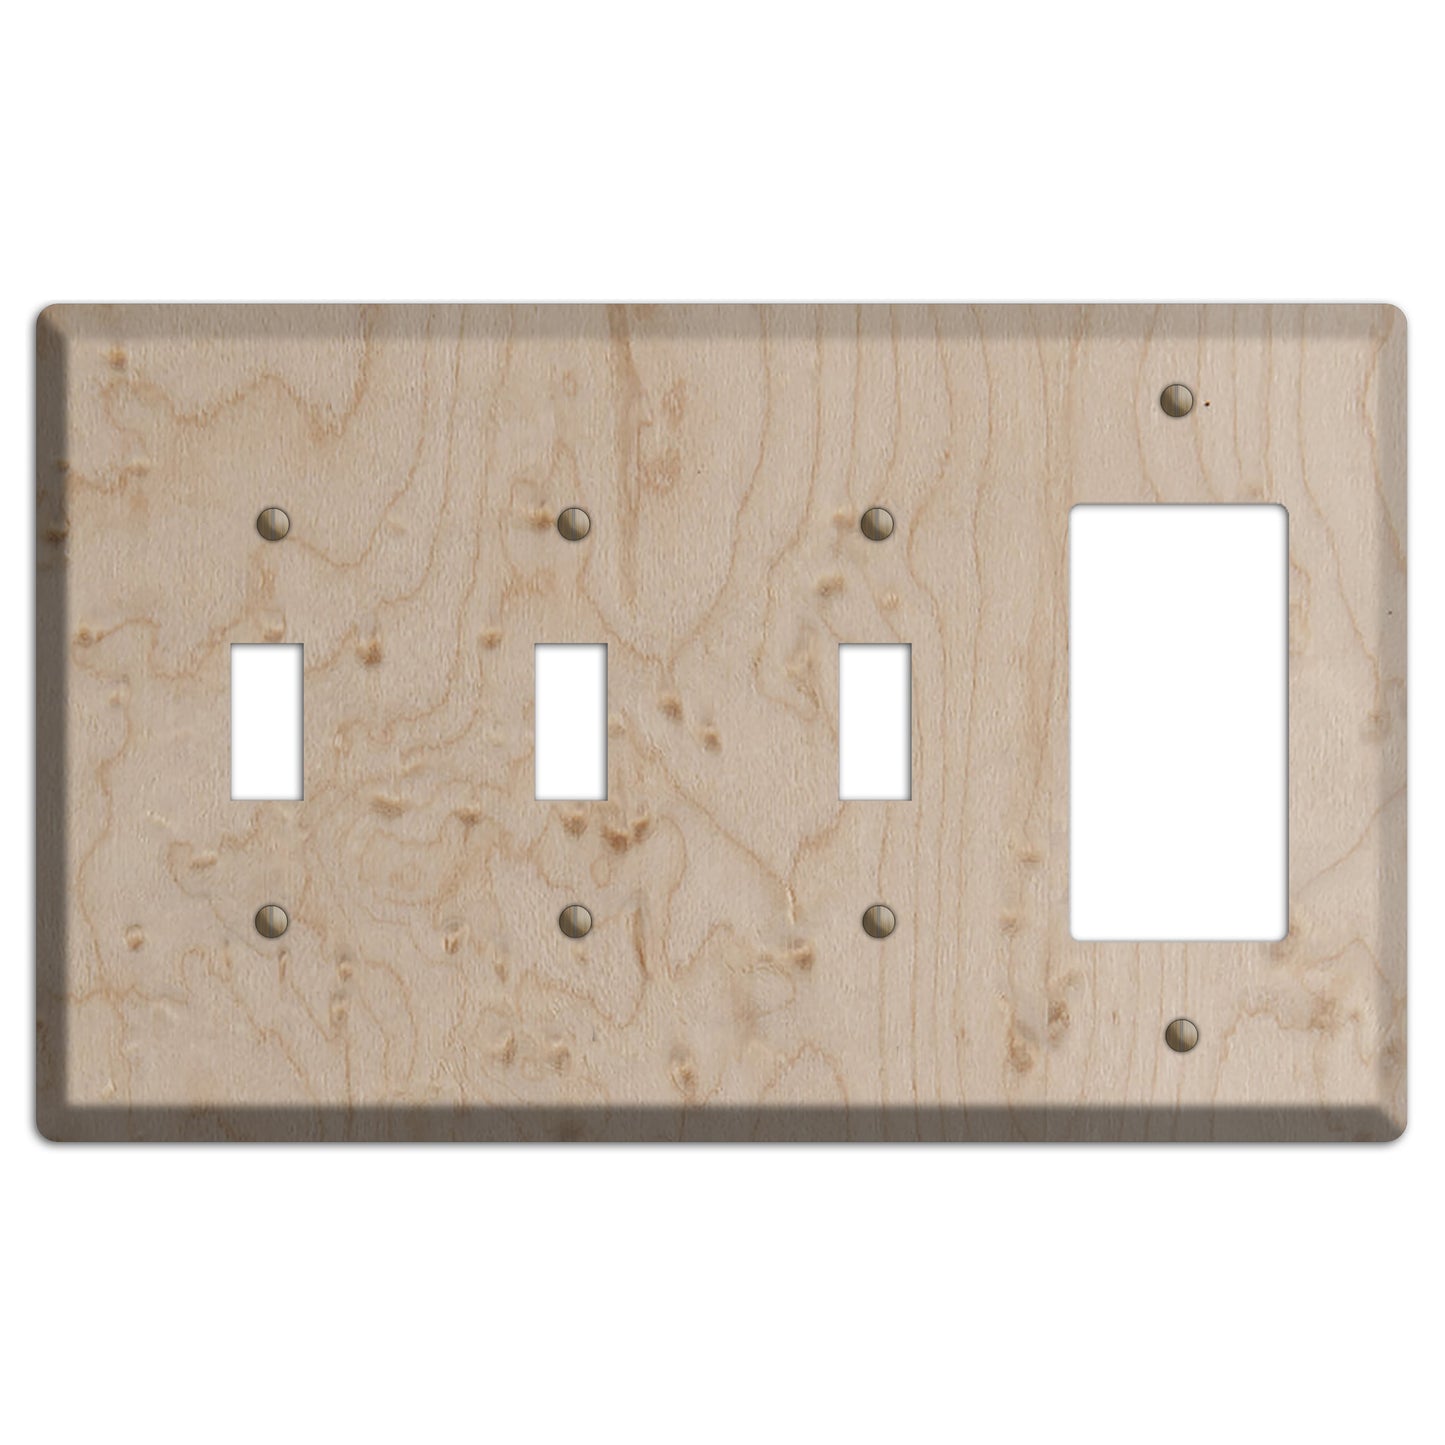 Birdseye Maple Wood 3 Toggle / Rocker Outlet Cover Plate